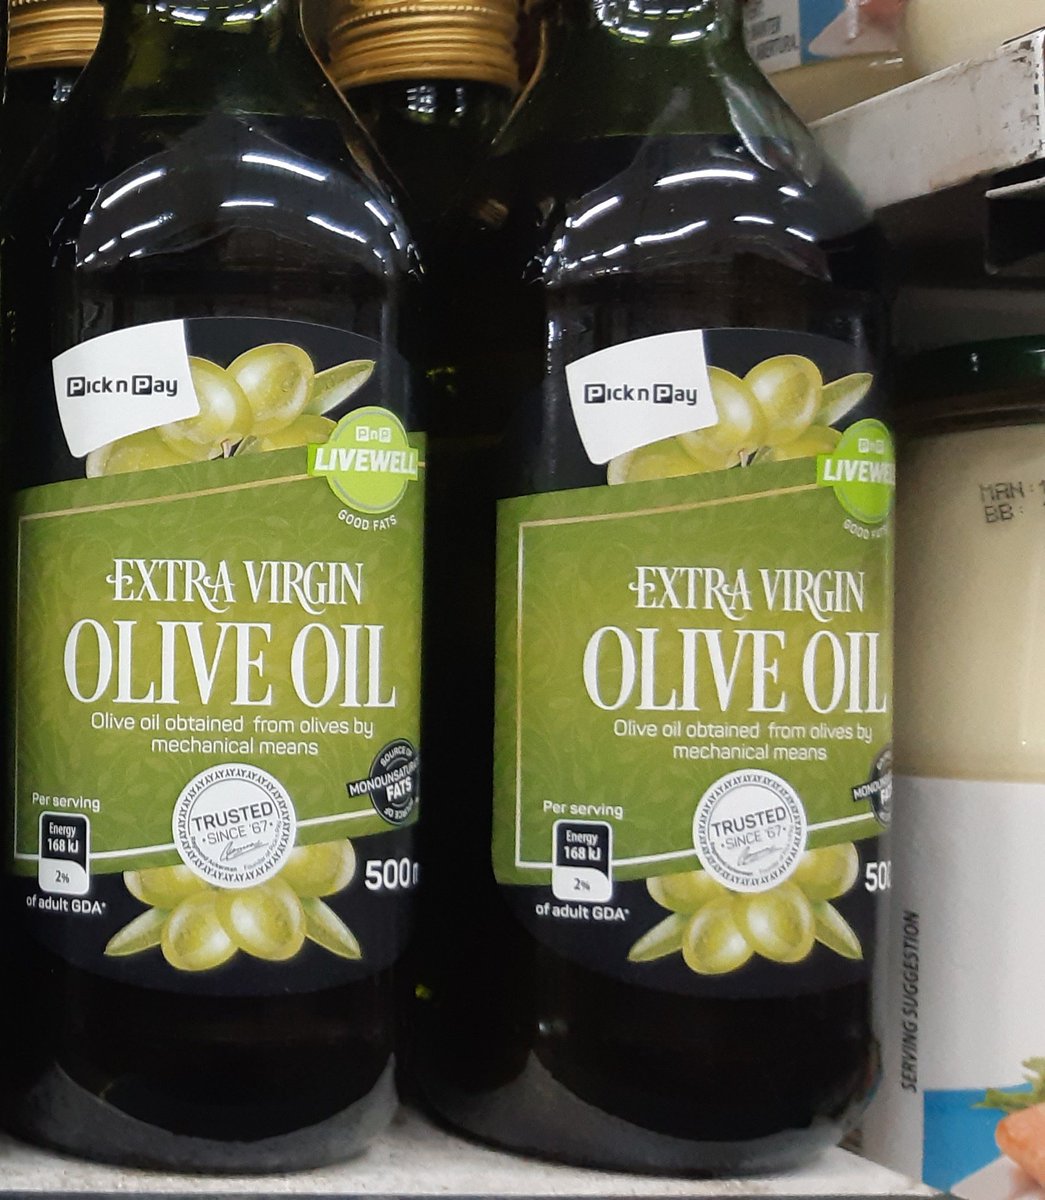 Quality extra virgin olive oil has a luminous green/yellow colour. The colour will differ (like wine) but there will always be a slightly green/luminous colour. It is ALWAYS sold in dark bottles, like red wine, light destroys it's nutrients and flavour.